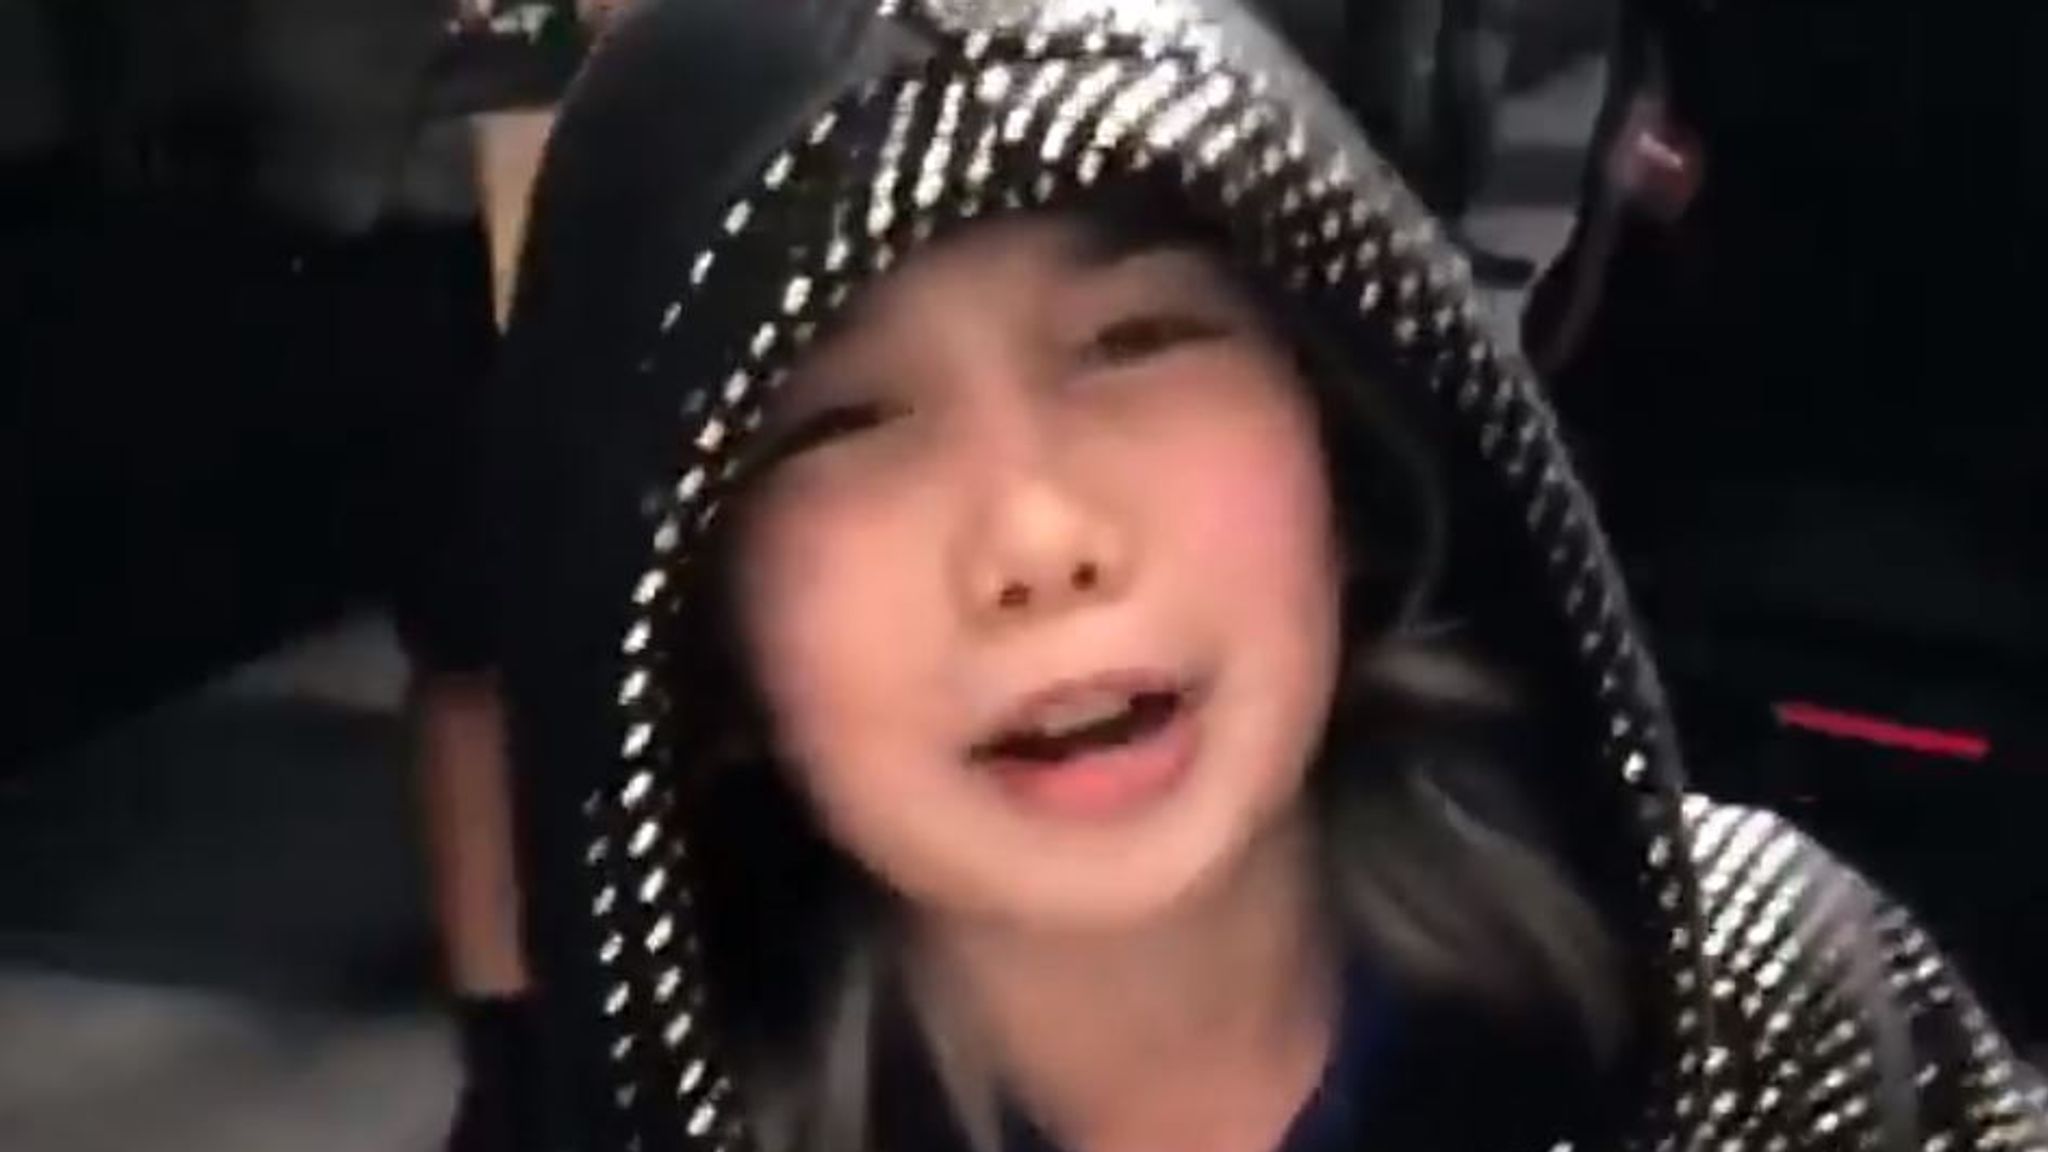 What is Lil Tay's real name?